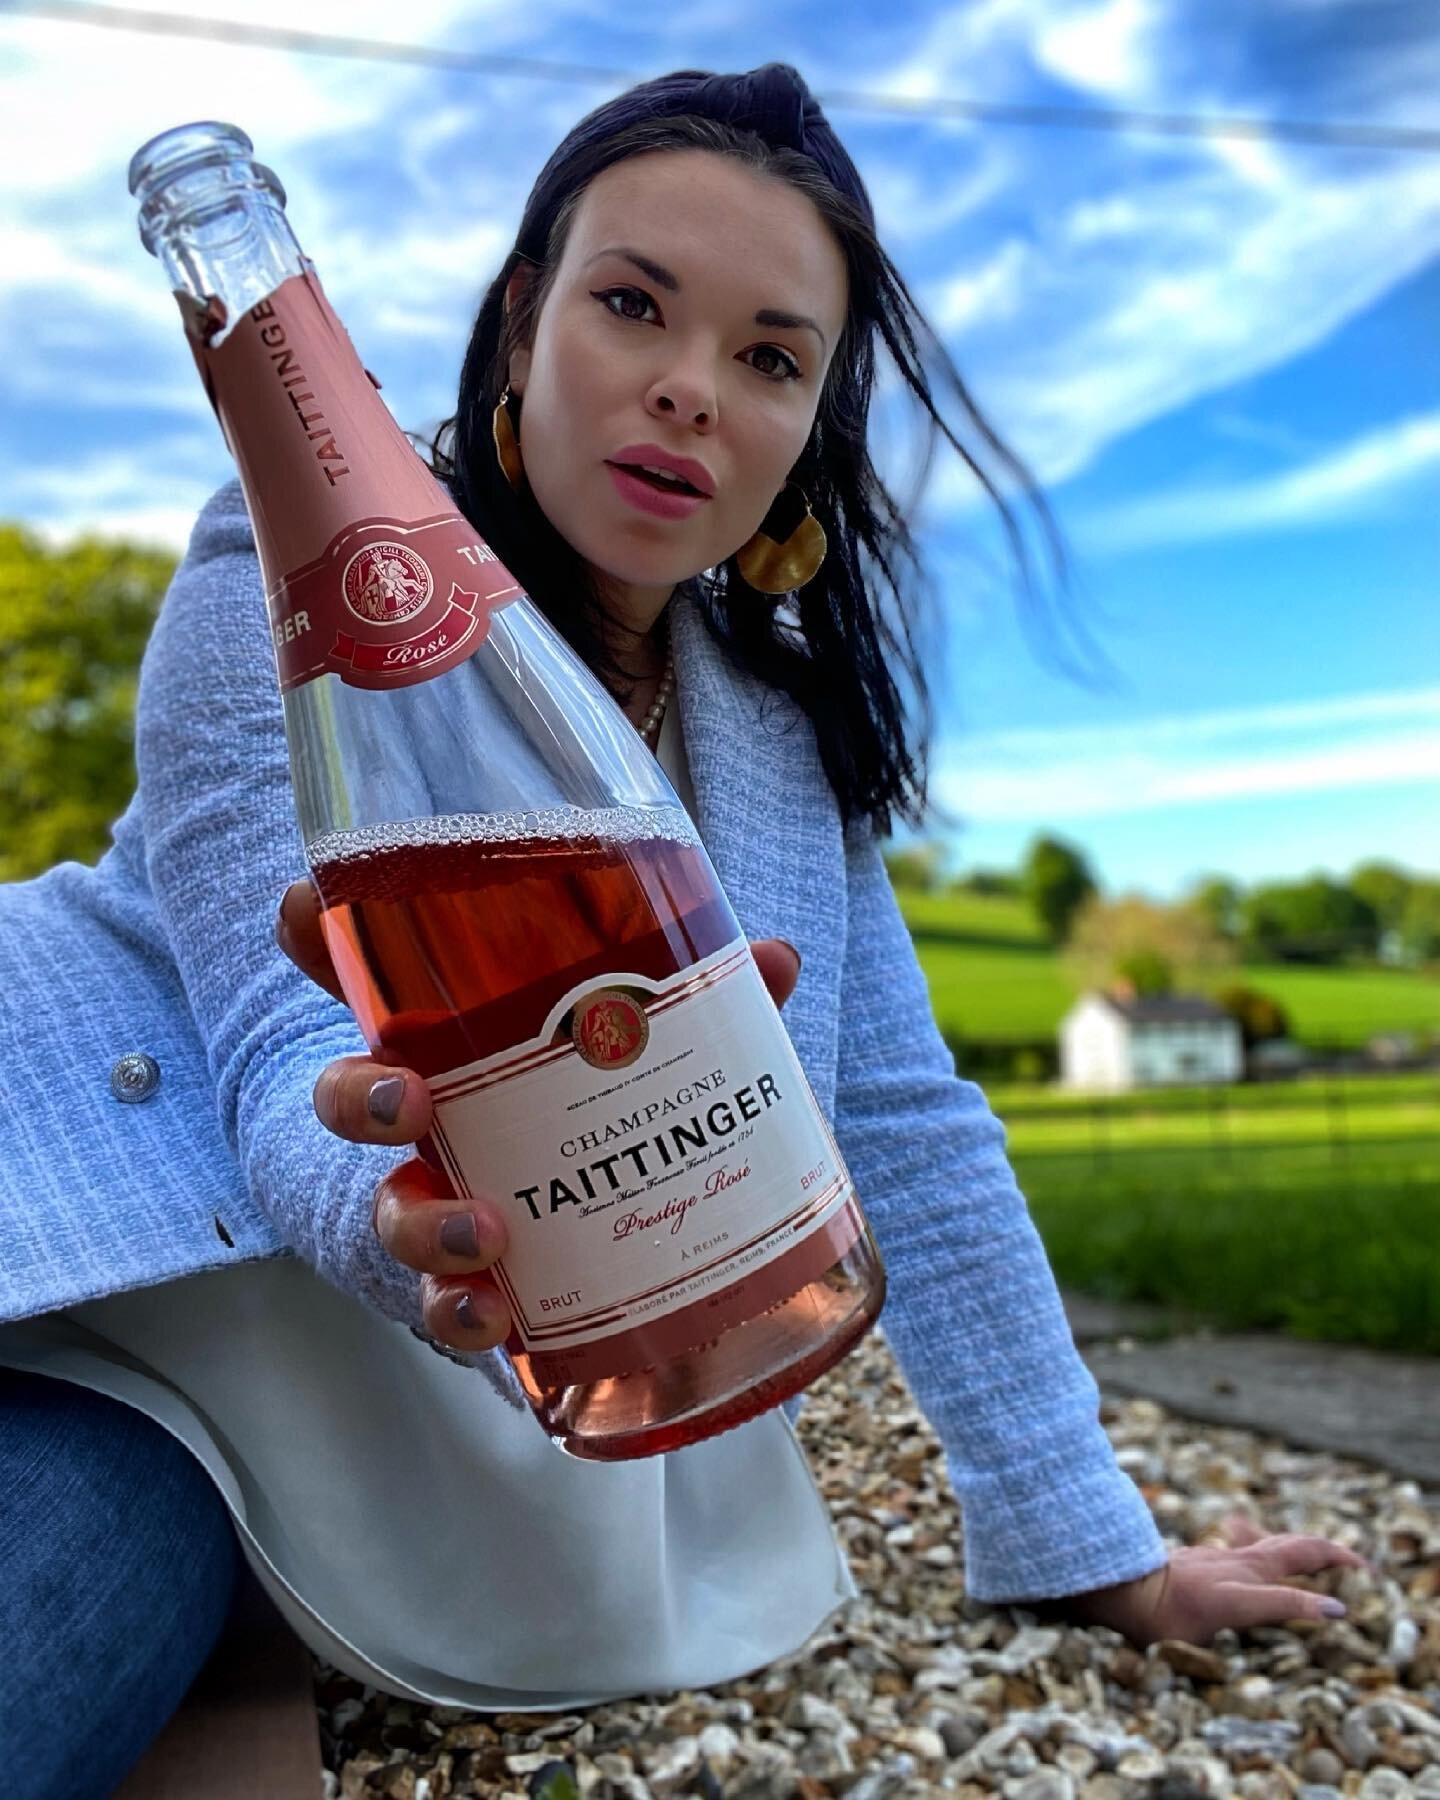 🍾 The long weekend continues with blue skies and sunshine - what are you celebrating with this work-free Monday? 

🍾 Did you know that it is illegal in France to make a ros&eacute; by blending white and red wines together EXCEPT for in Champagne. B